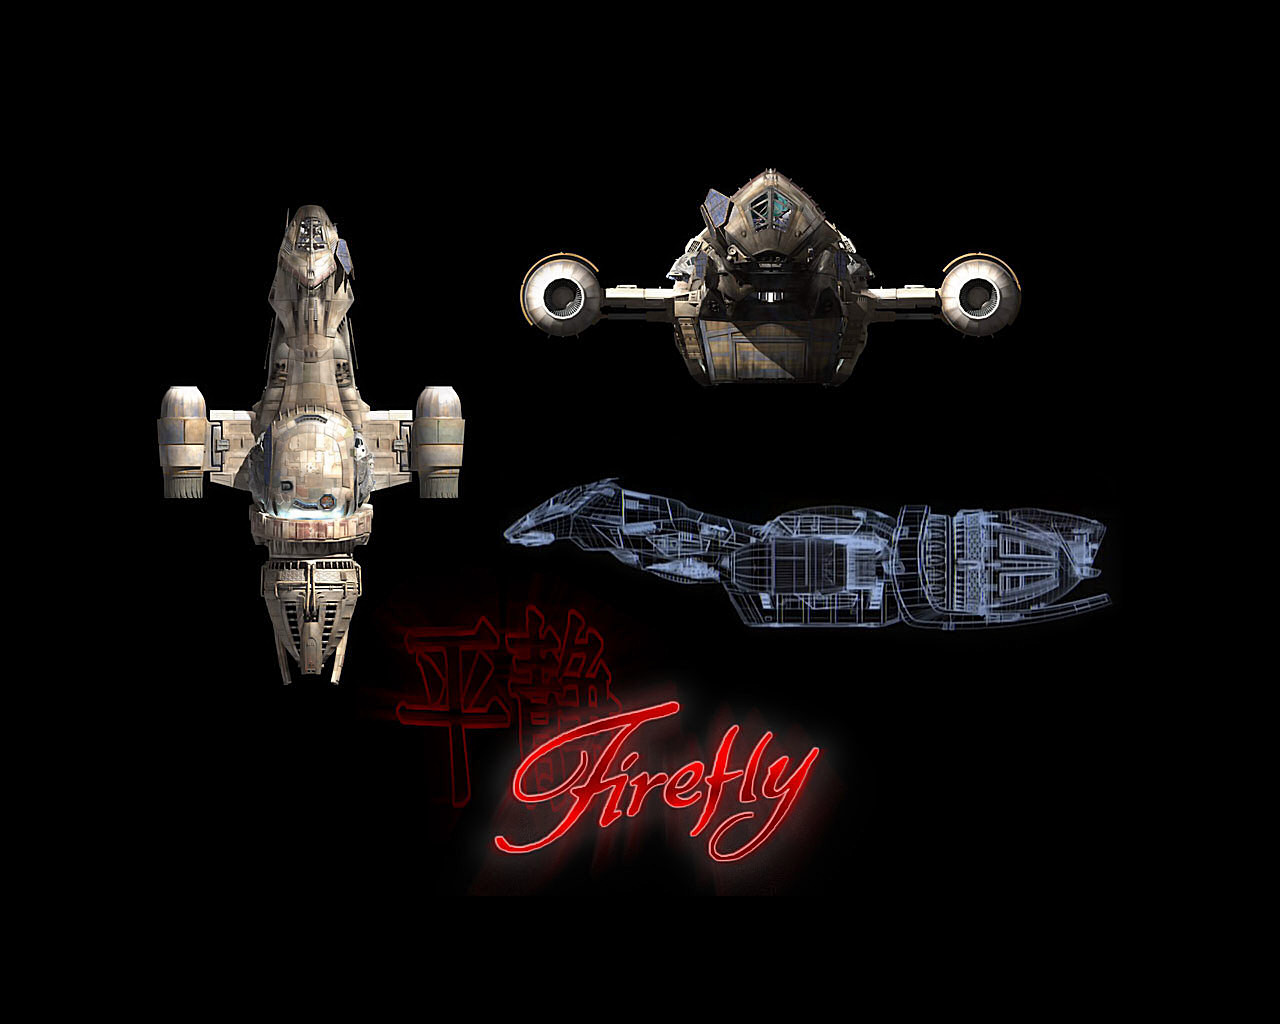 Firefly Serenity Wallpaper Table